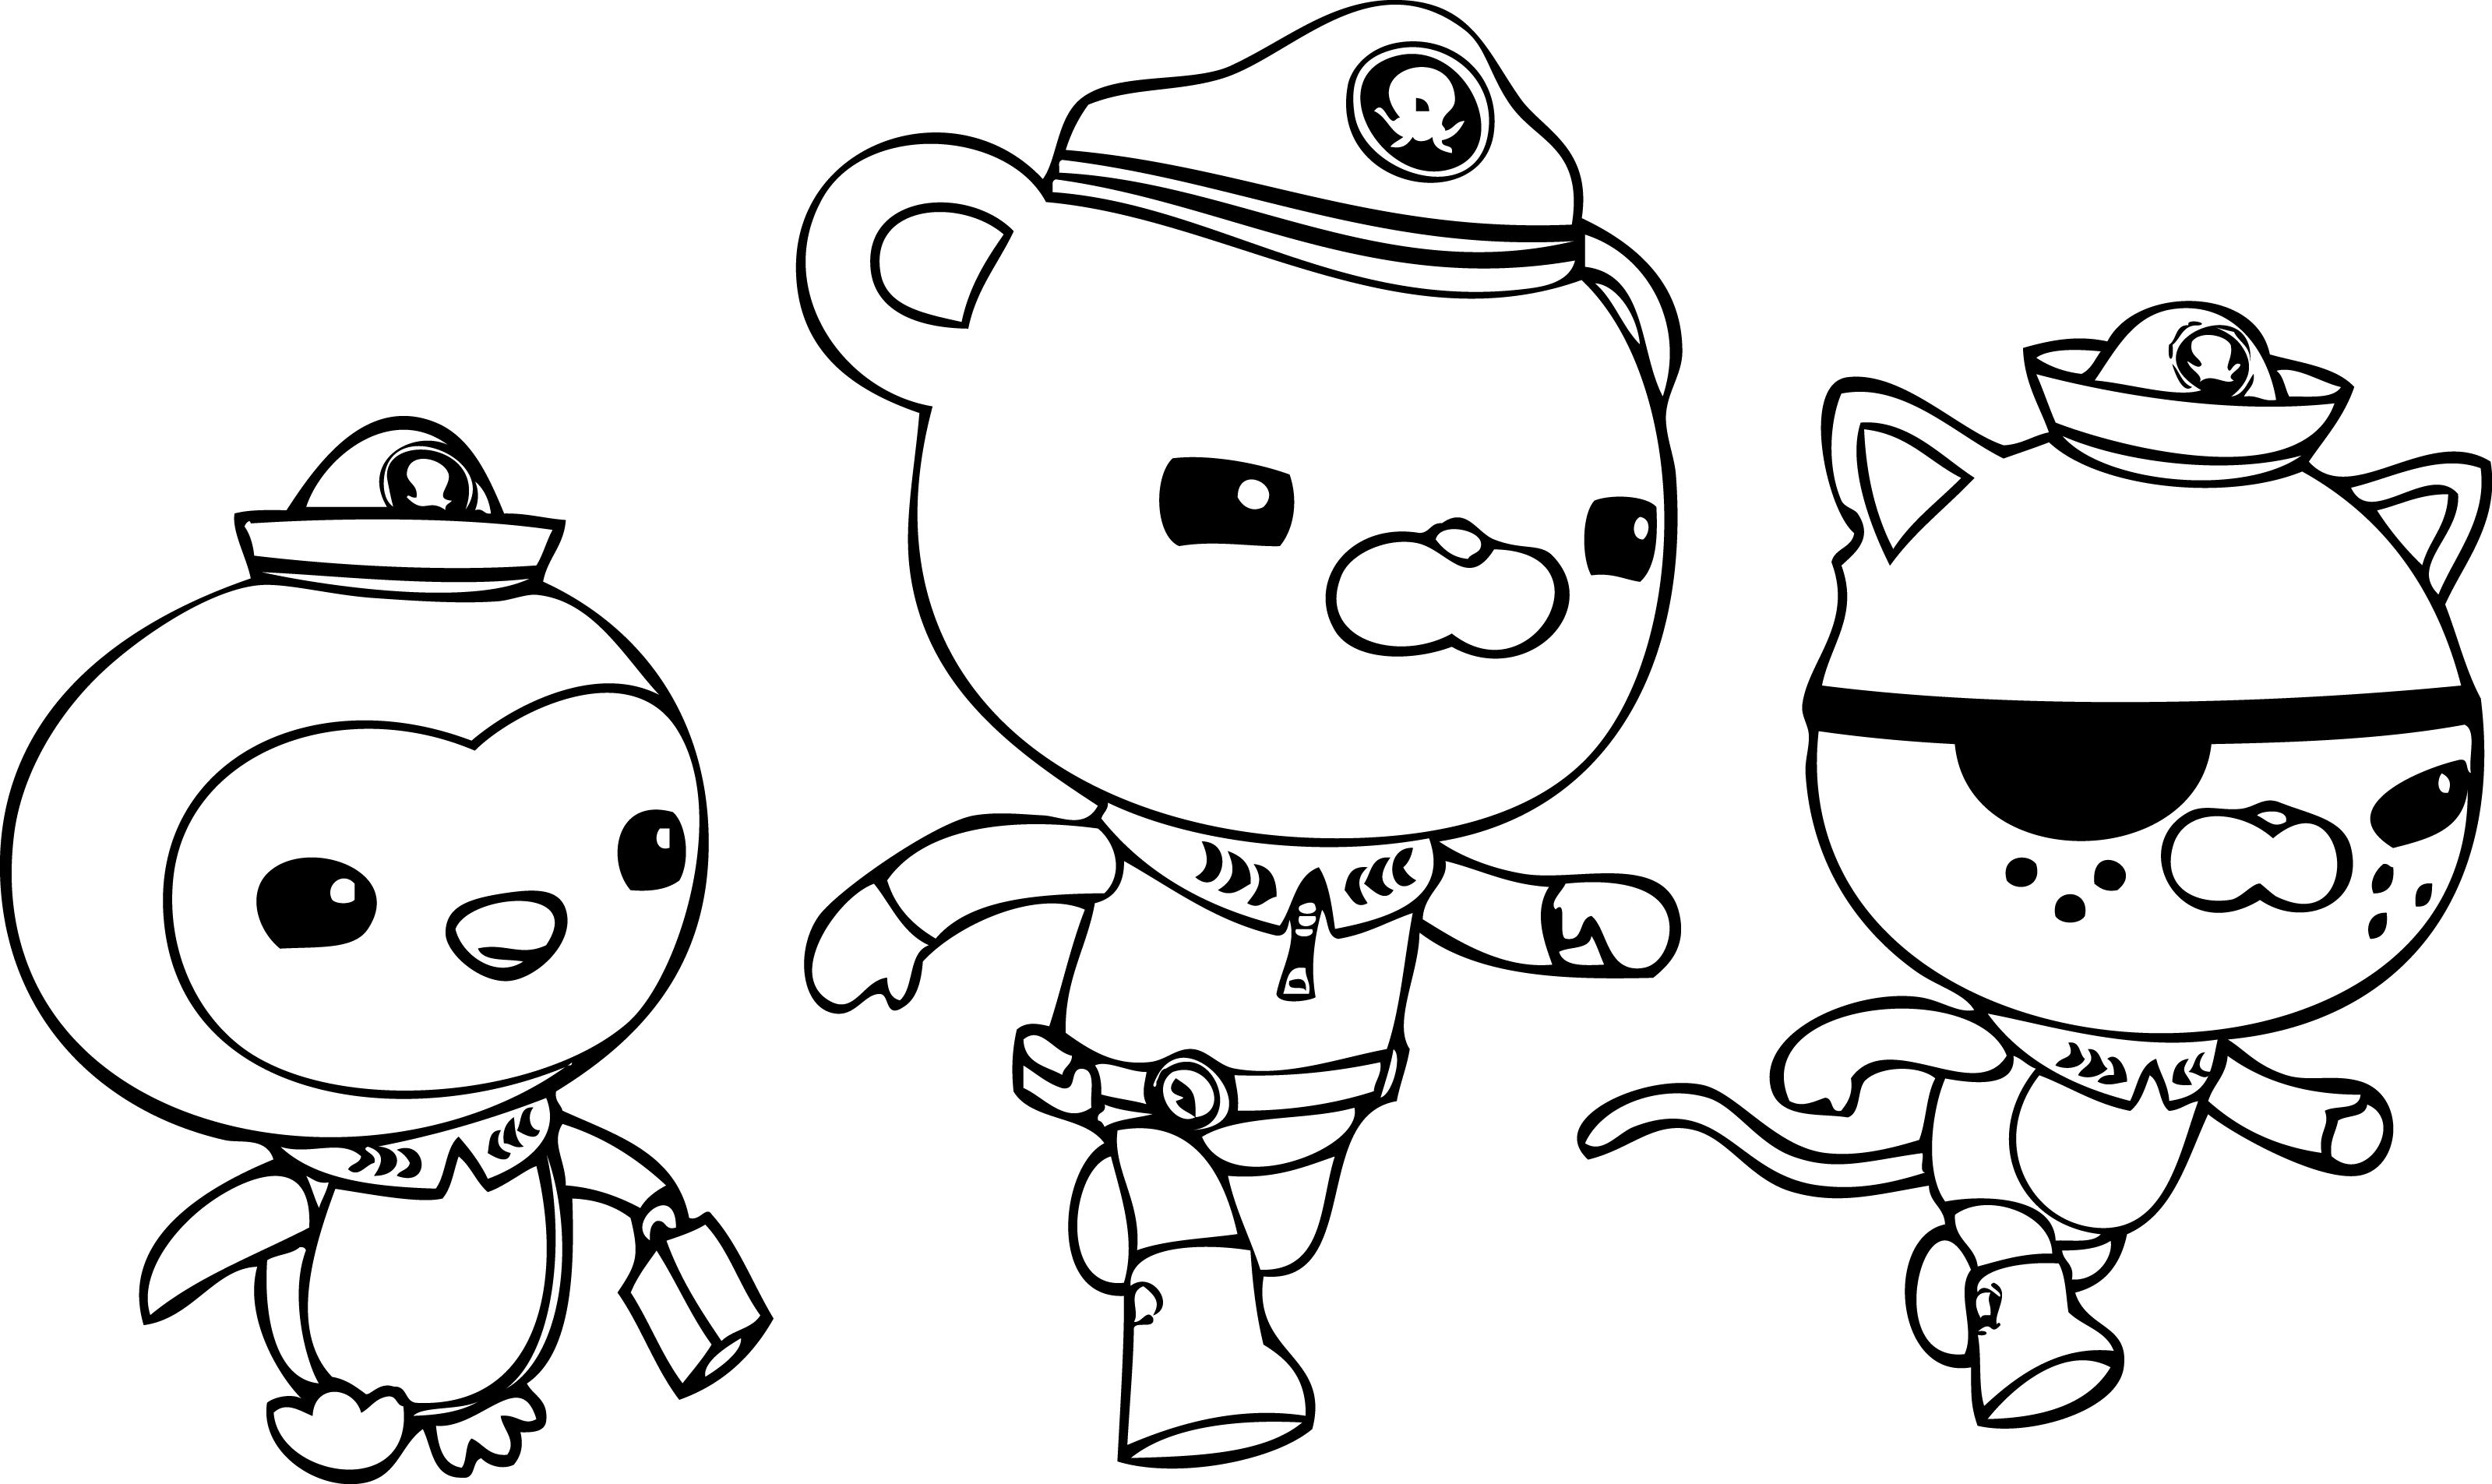 Captain Barnacles Coloring Pages Octonauts Coloring Pages Best Coloring Pages For Kids